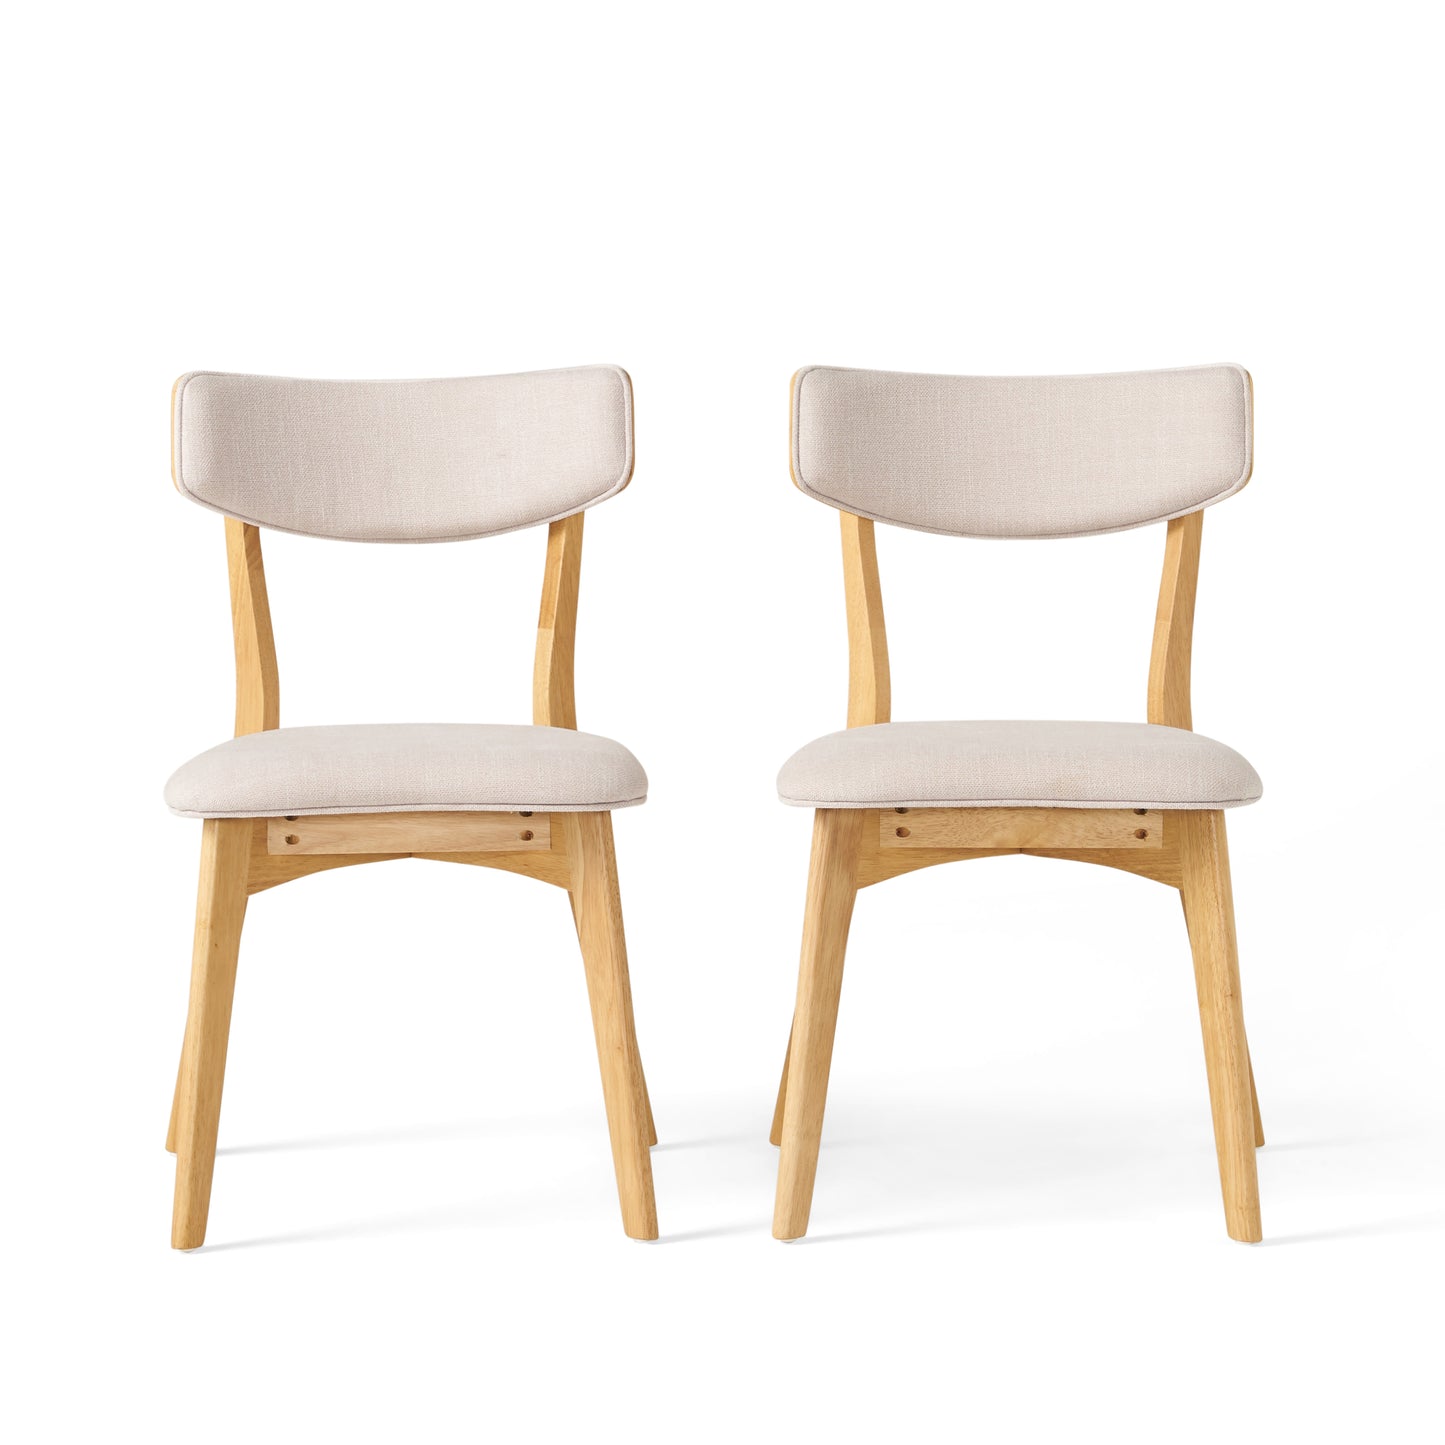 Turat Mid Century Fabric Dining Chairs with Natural Oak Finish(Set of 2)